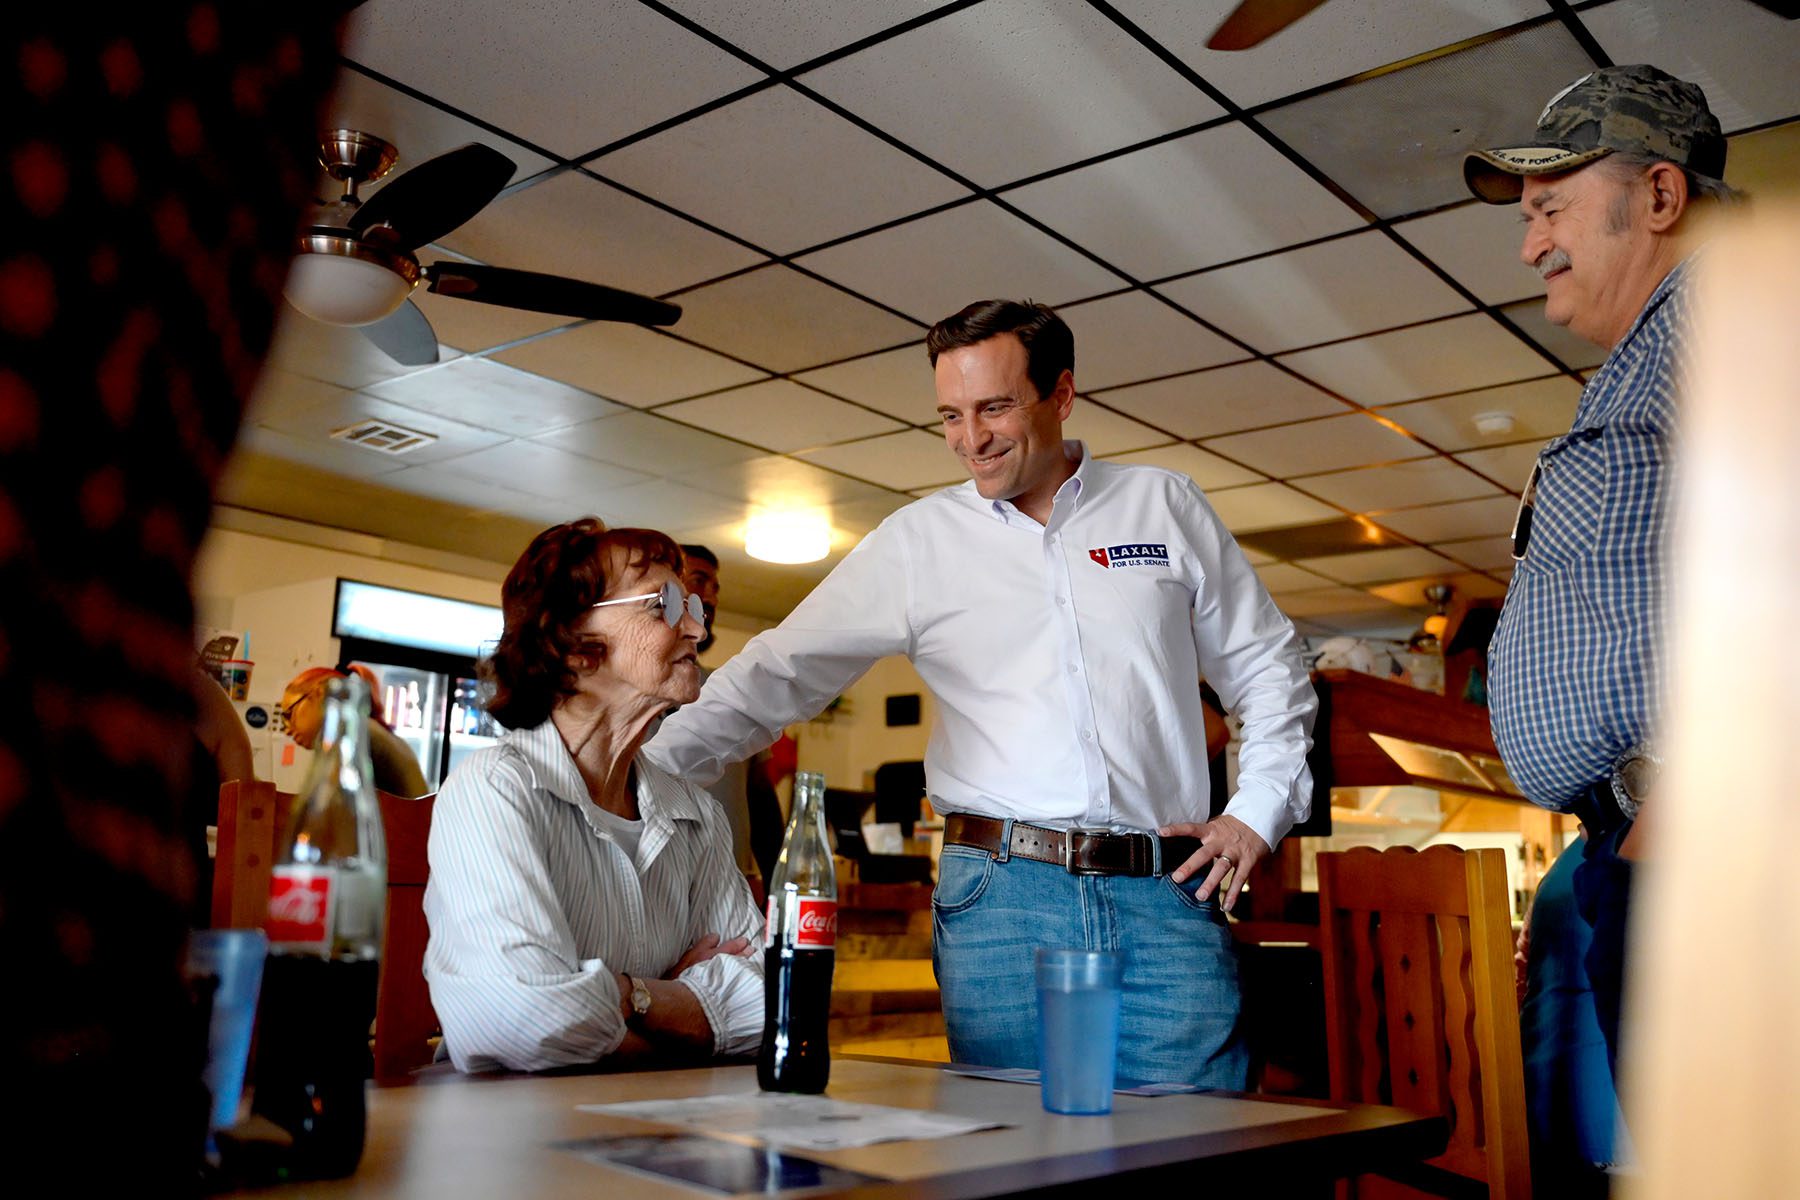 Adam Laxalt greets people during a campaign event at a restaurant.